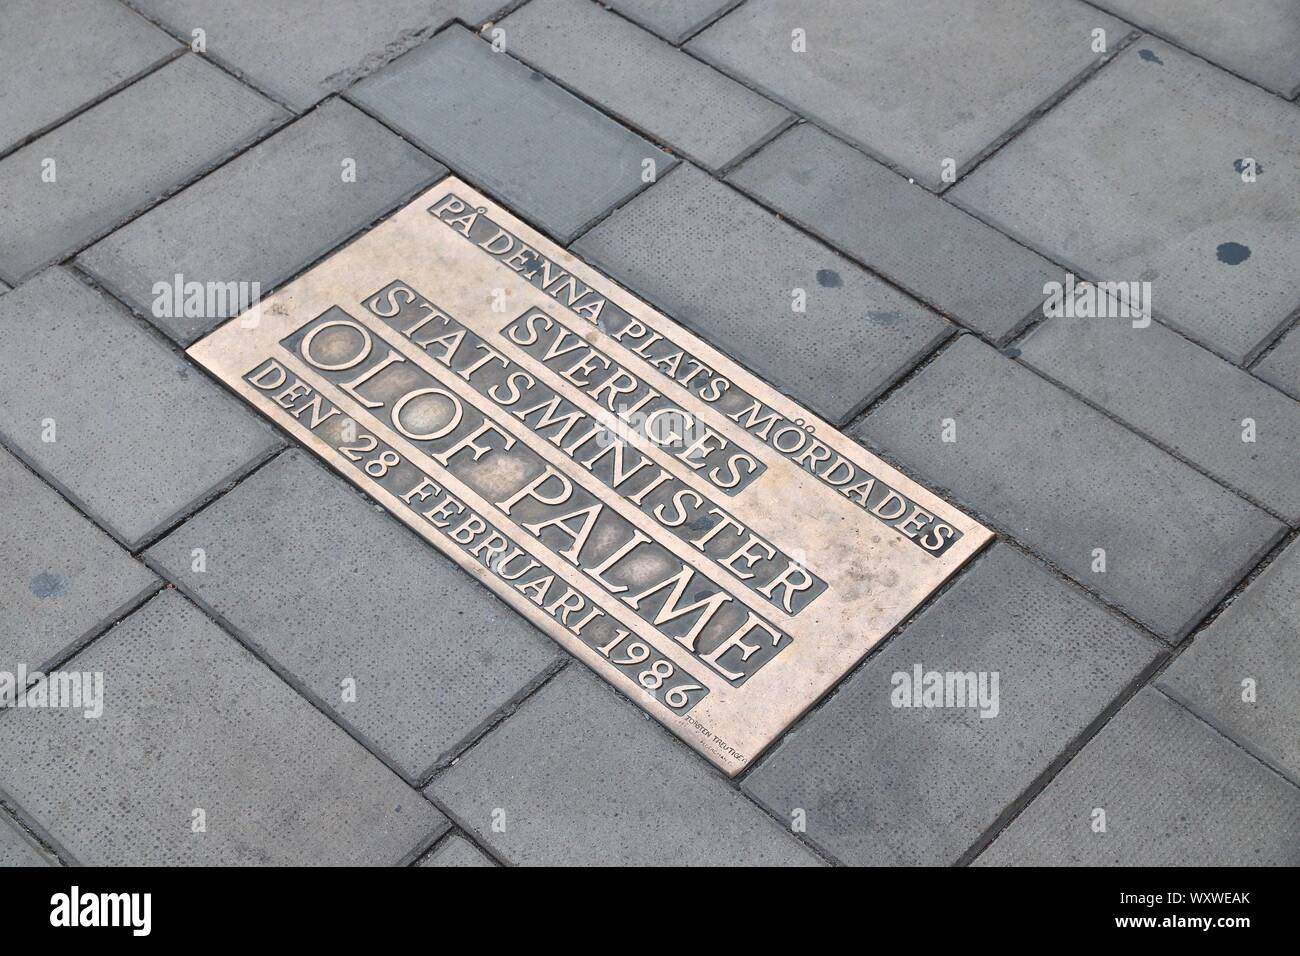 STOCKHOLM, SWEDEN - AUGUST 22, 2018: Memorial plaque at the location of assassination of Olof Palme, Prime Minister of Sweden at Sveavagen street in S Stock Photo